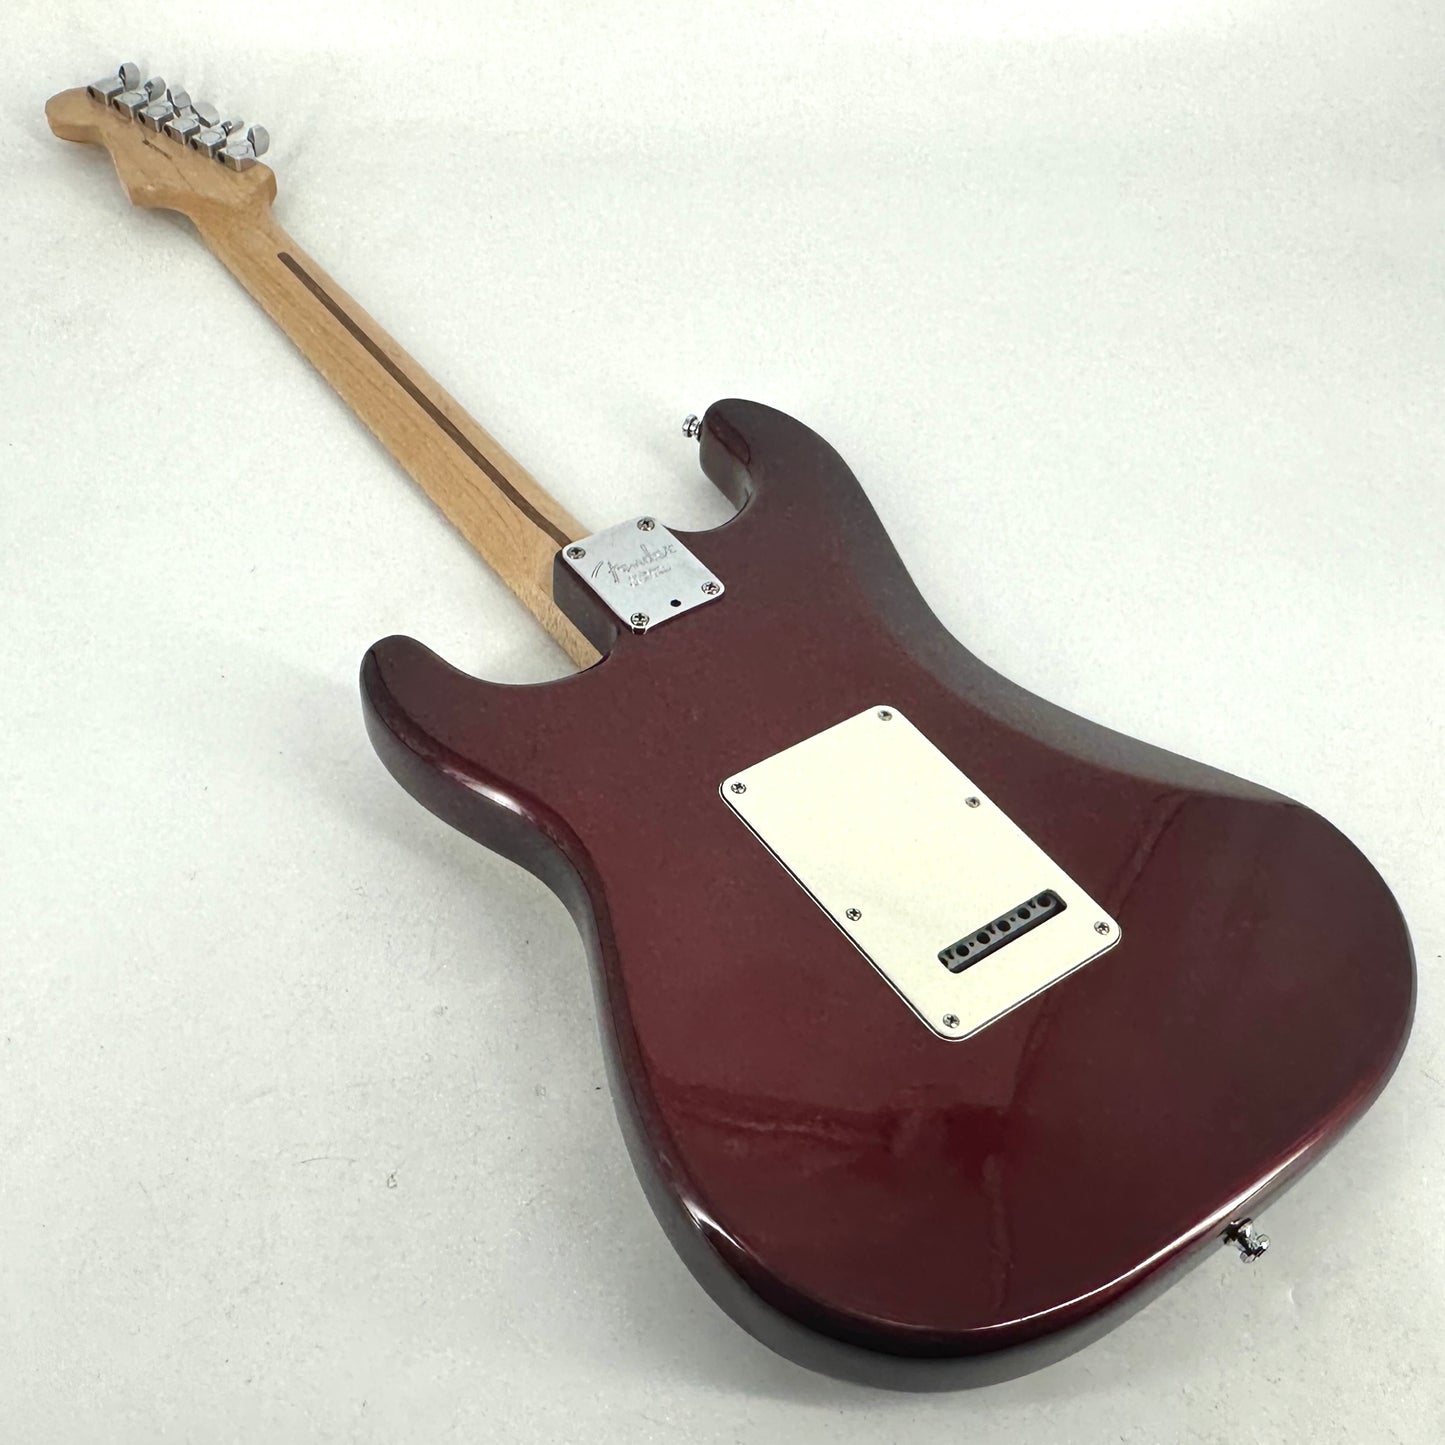 2007 Fender American Standard / Series Stratocaster – Candy Cola Red